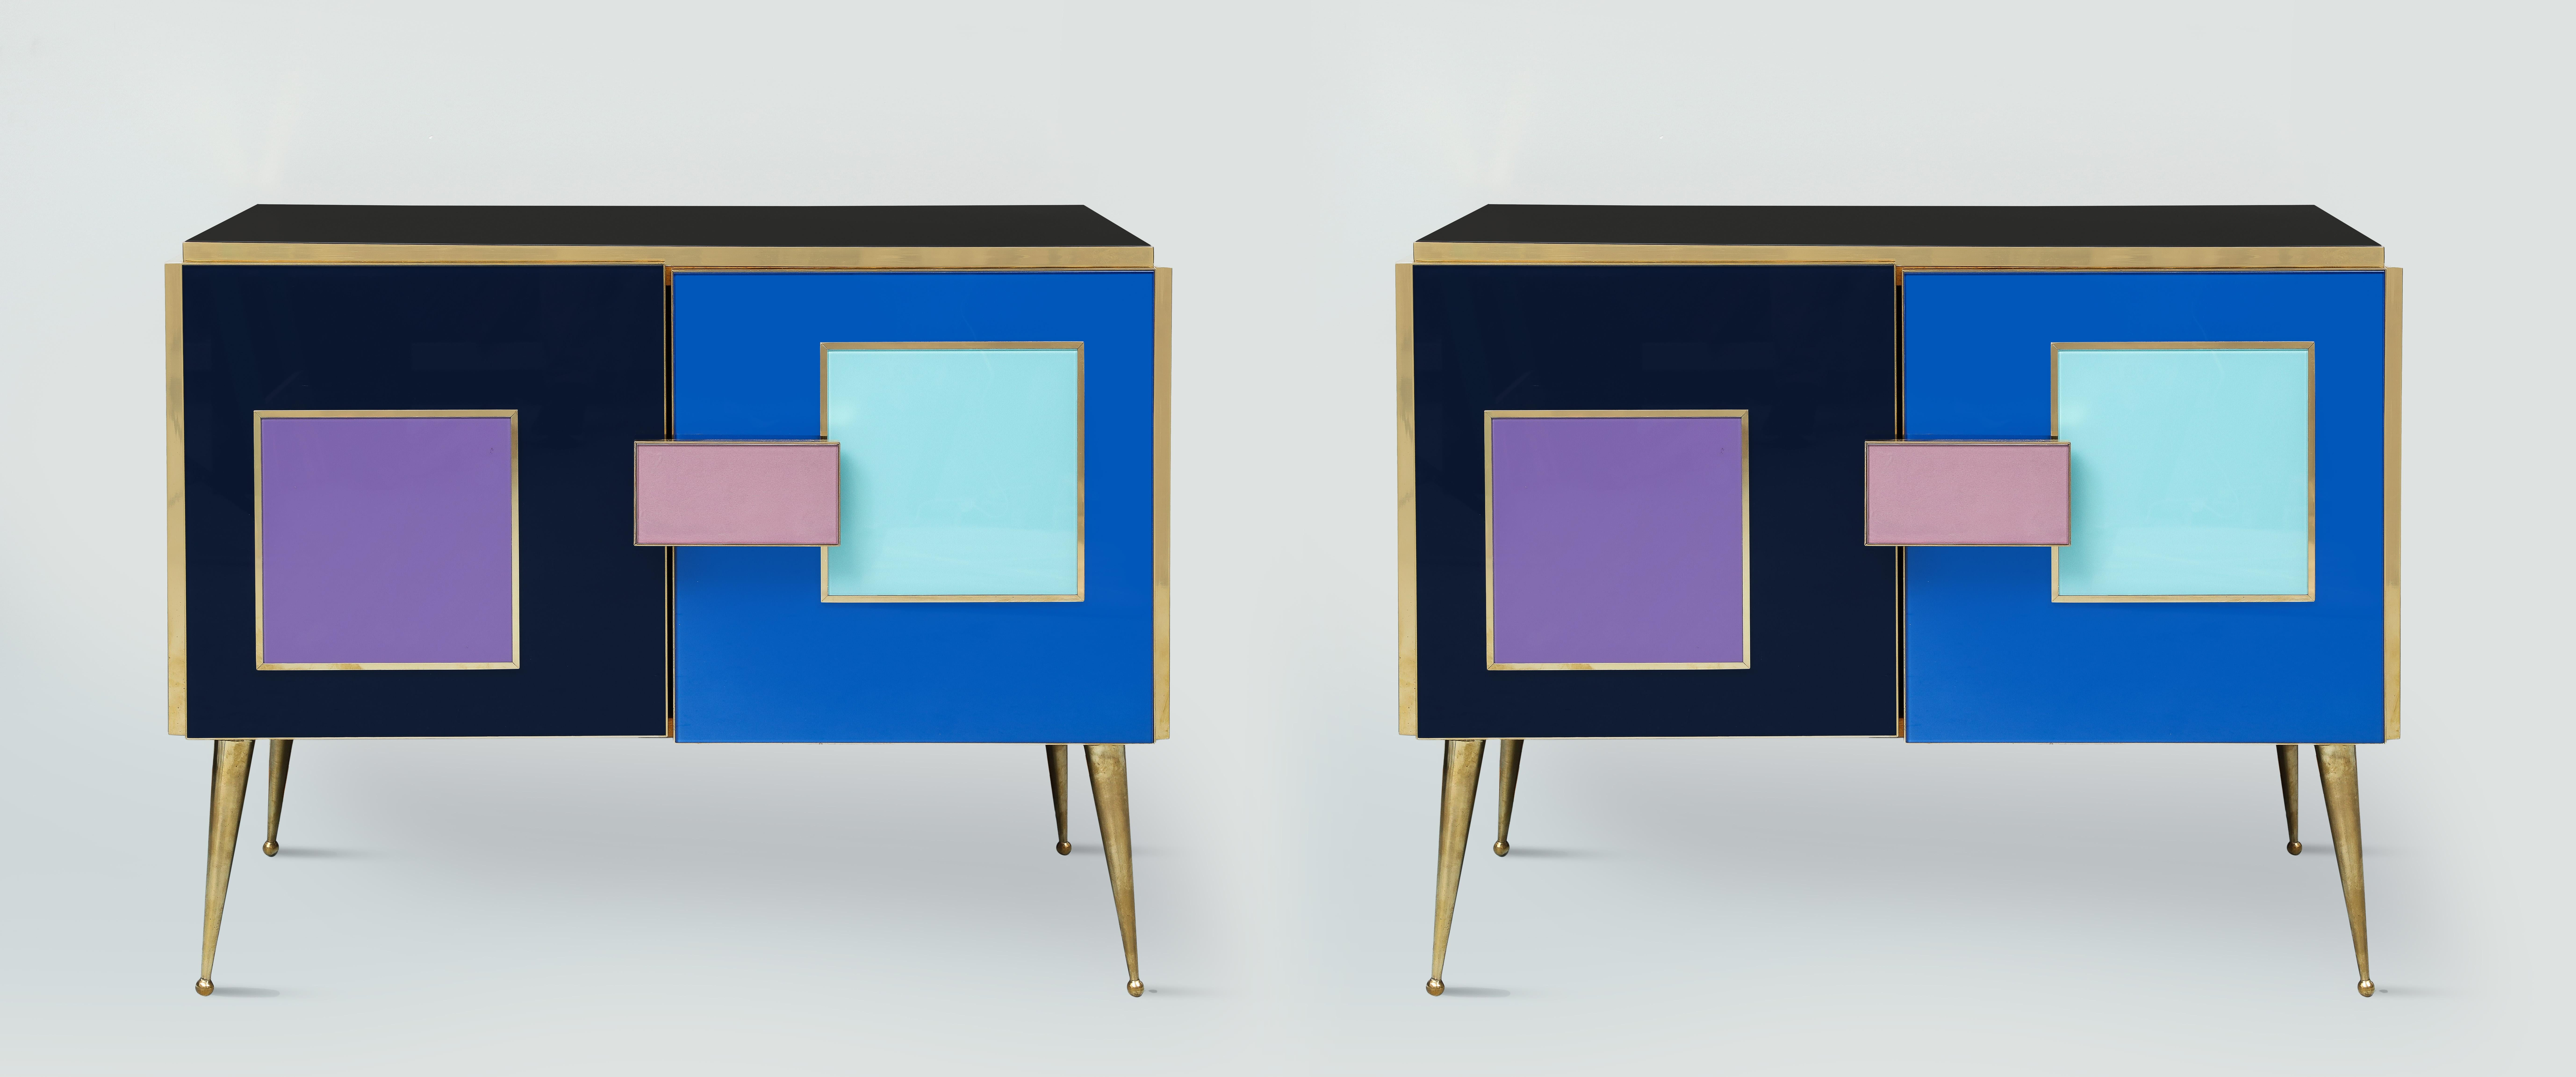 Hand made by an Italian artisan this cabinet with a wooden frame, covered in handcrafted glass panels with brass inlays, brass legs and a spectacular designed rectangular brass handle will give a special touch to any decor. The colors are subtle and